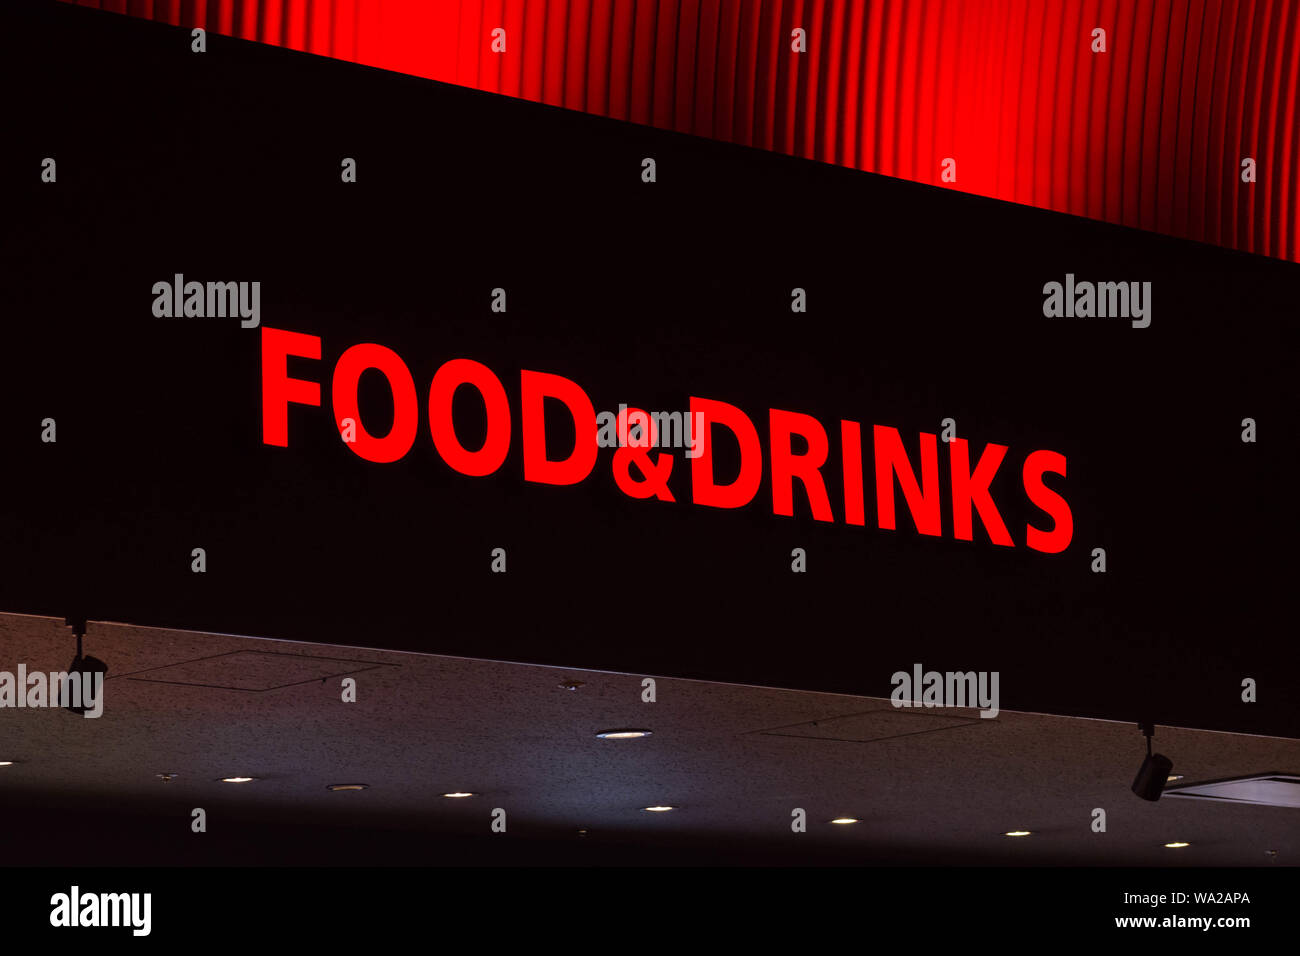 Food and drinks corner at a movie theater. Stock Photo